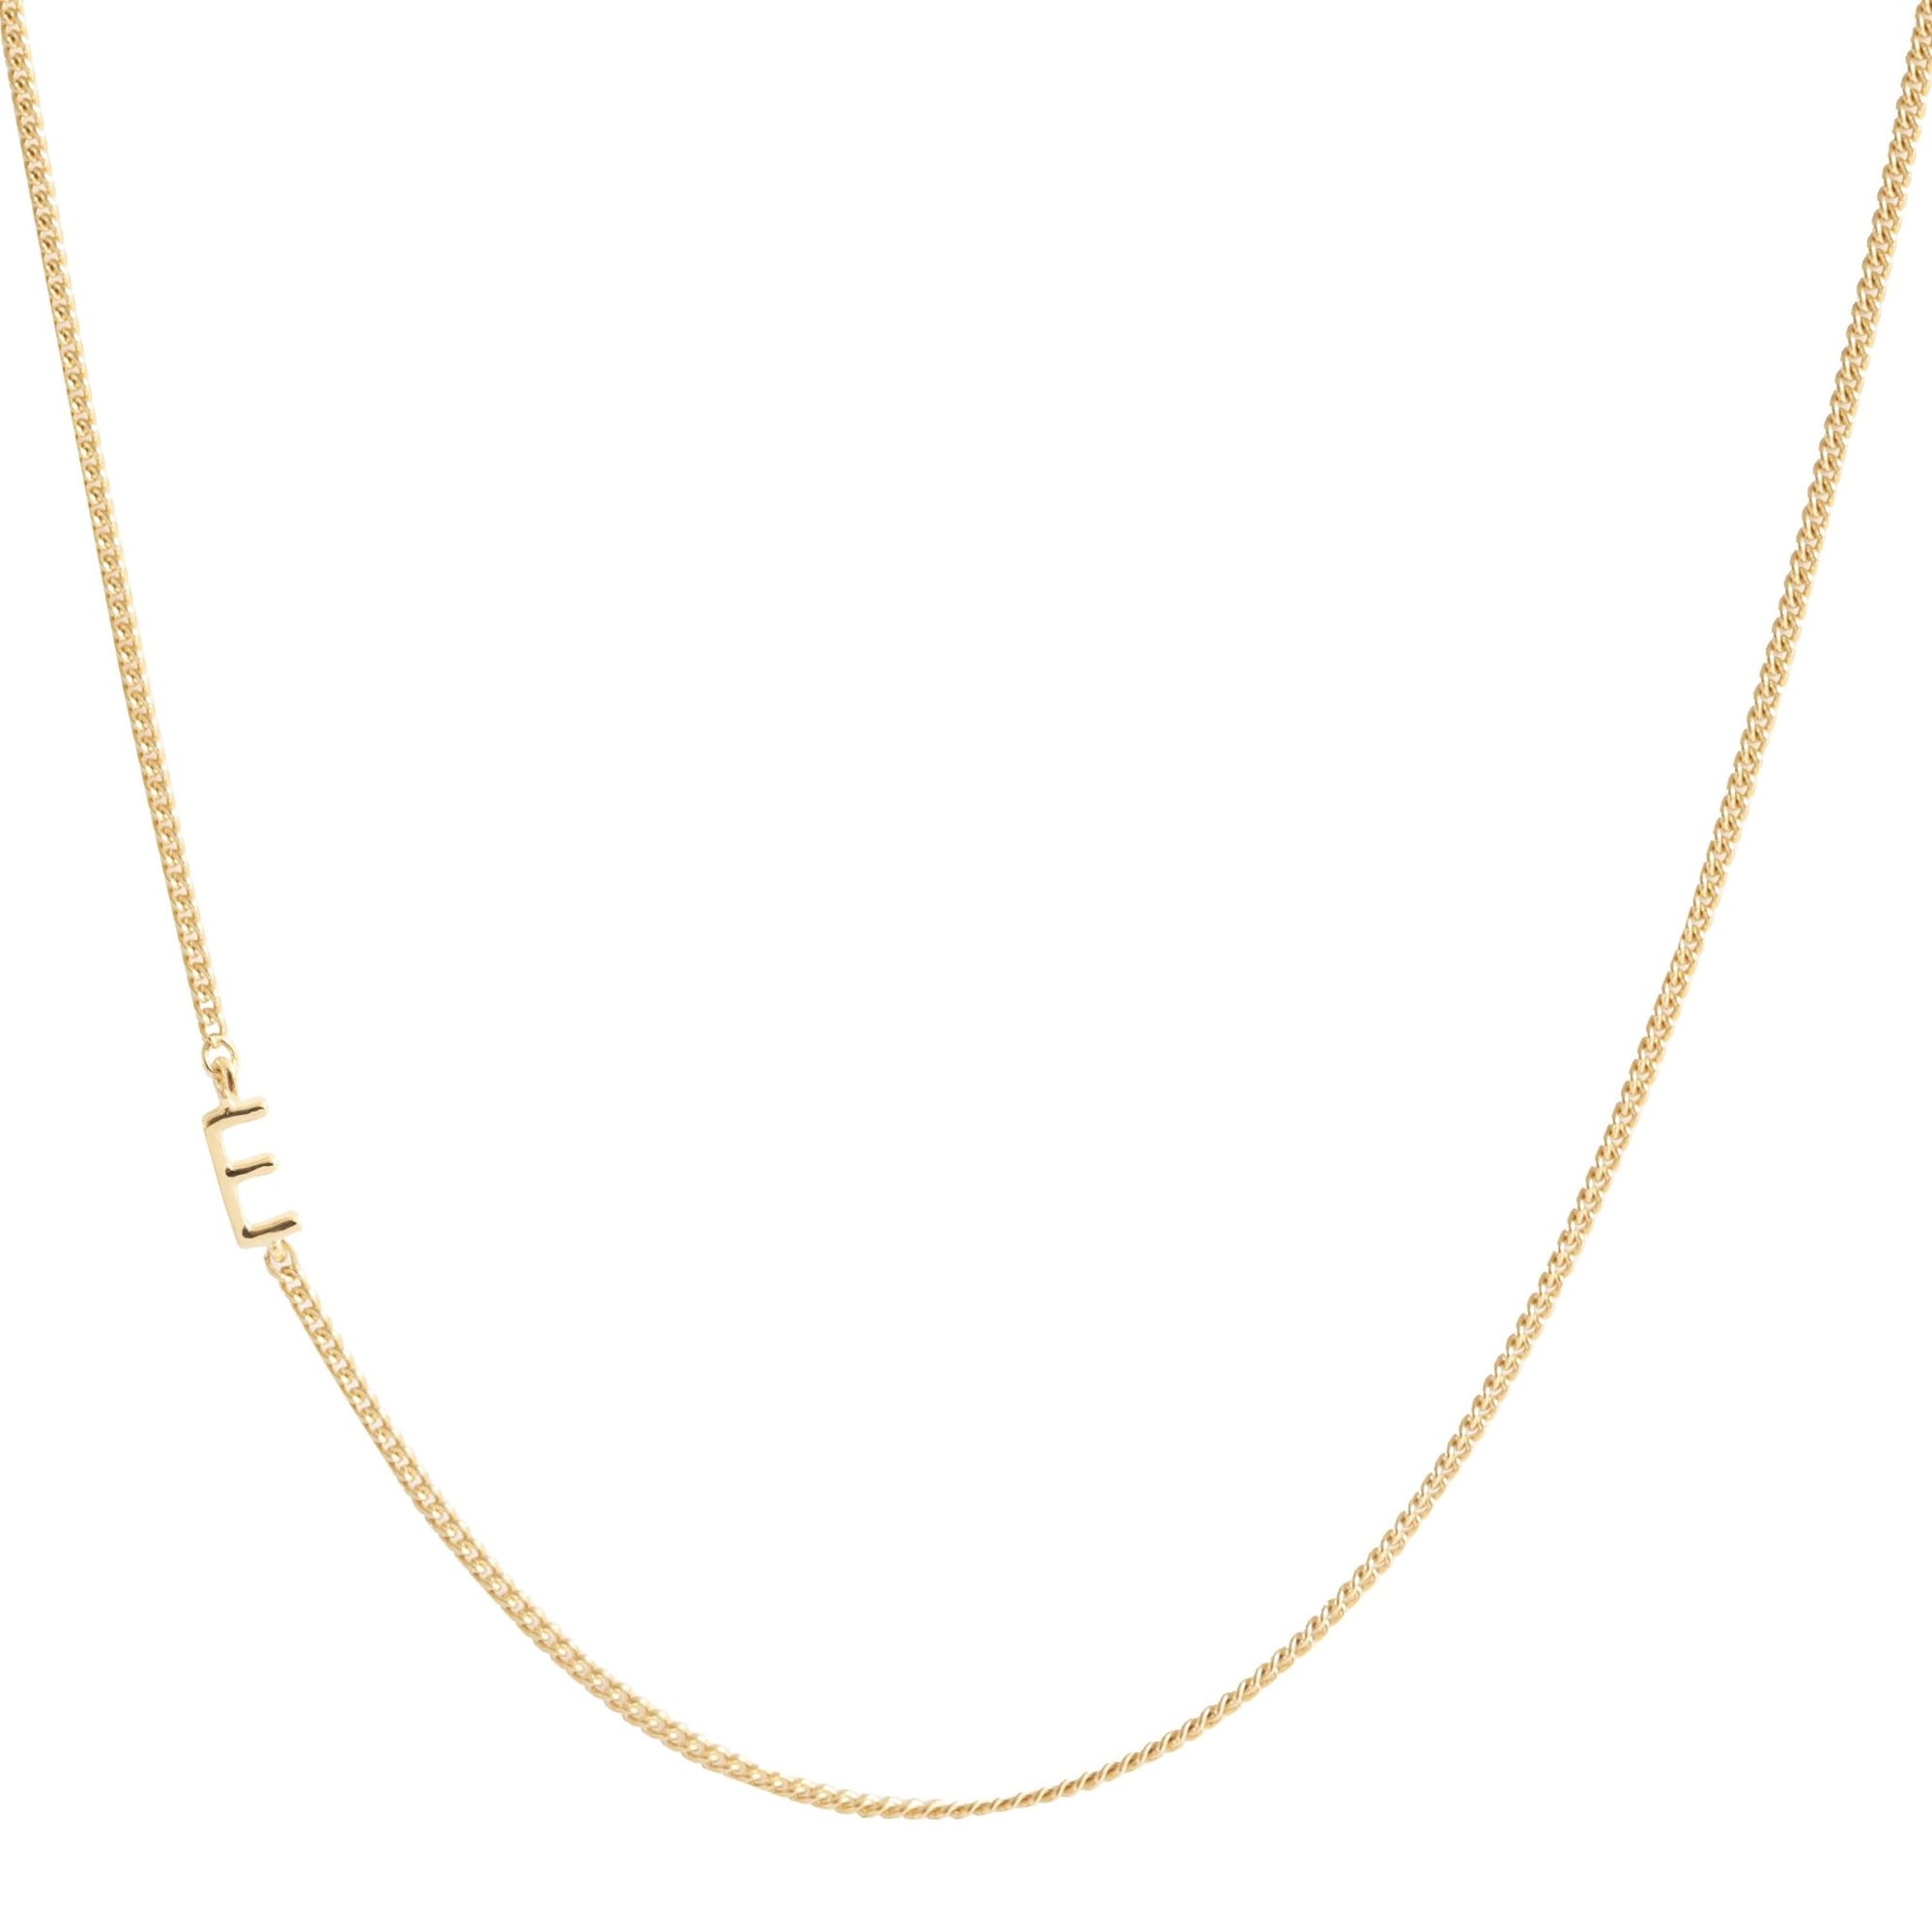 NOTABLE OFFSET INITIAL NECKLACE - E - GOLD - SO PRETTY CARA COTTER